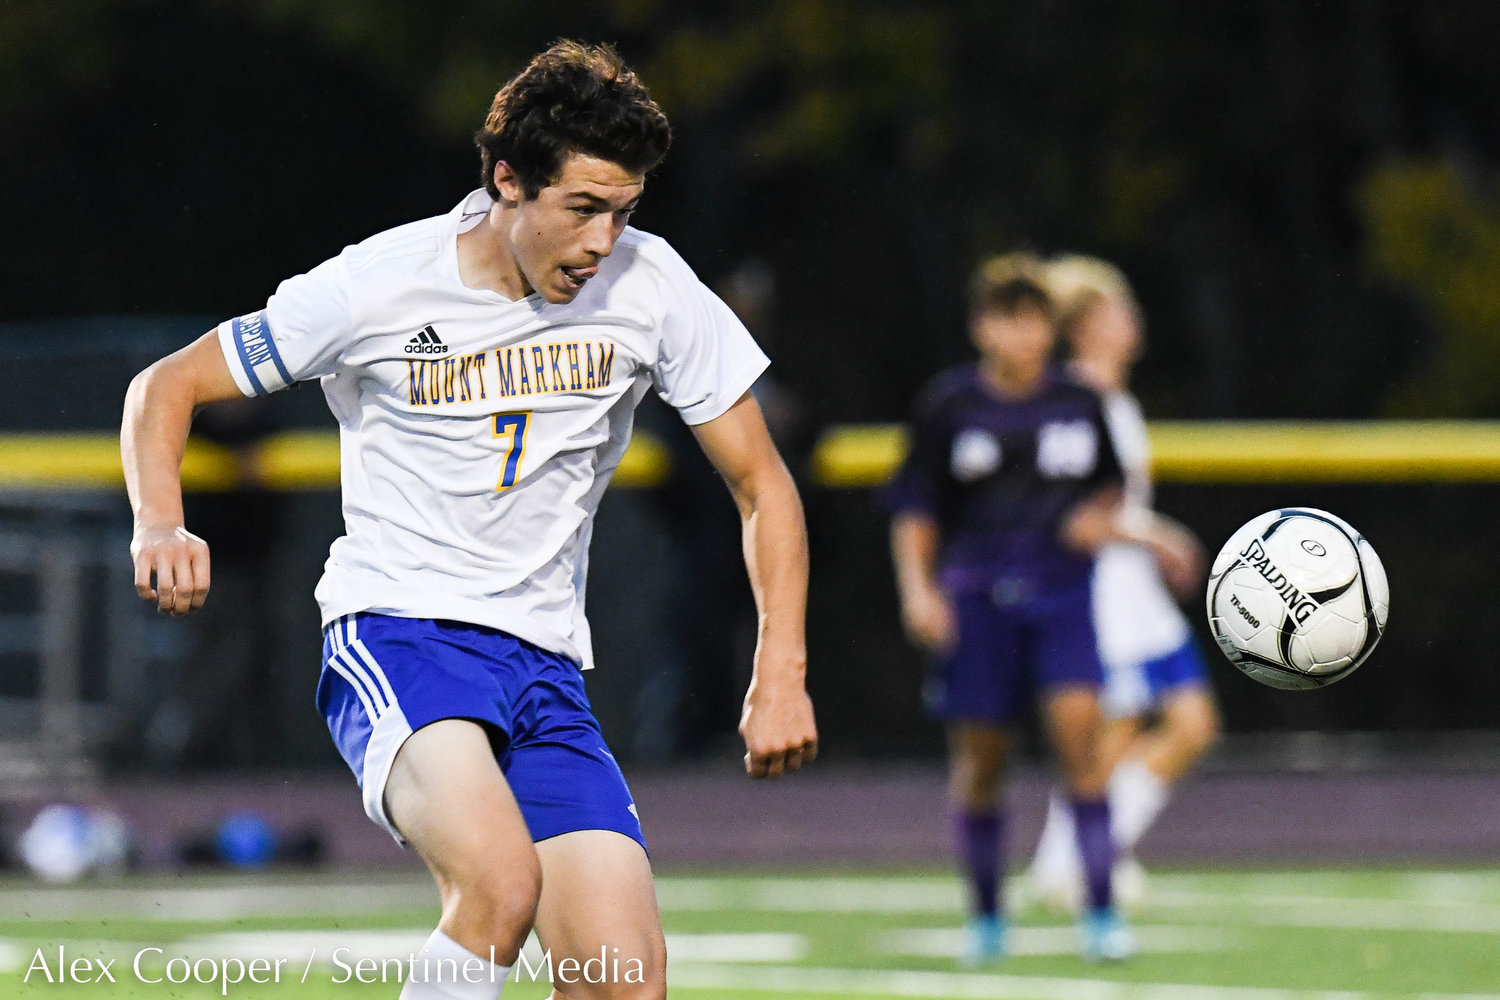 Mt. Markham player Kevin Gates (7) attempts to settle the ball during the Class C boys soccer semifinals game against Waterville on Wednesday, Oct. 26 at Canastota.